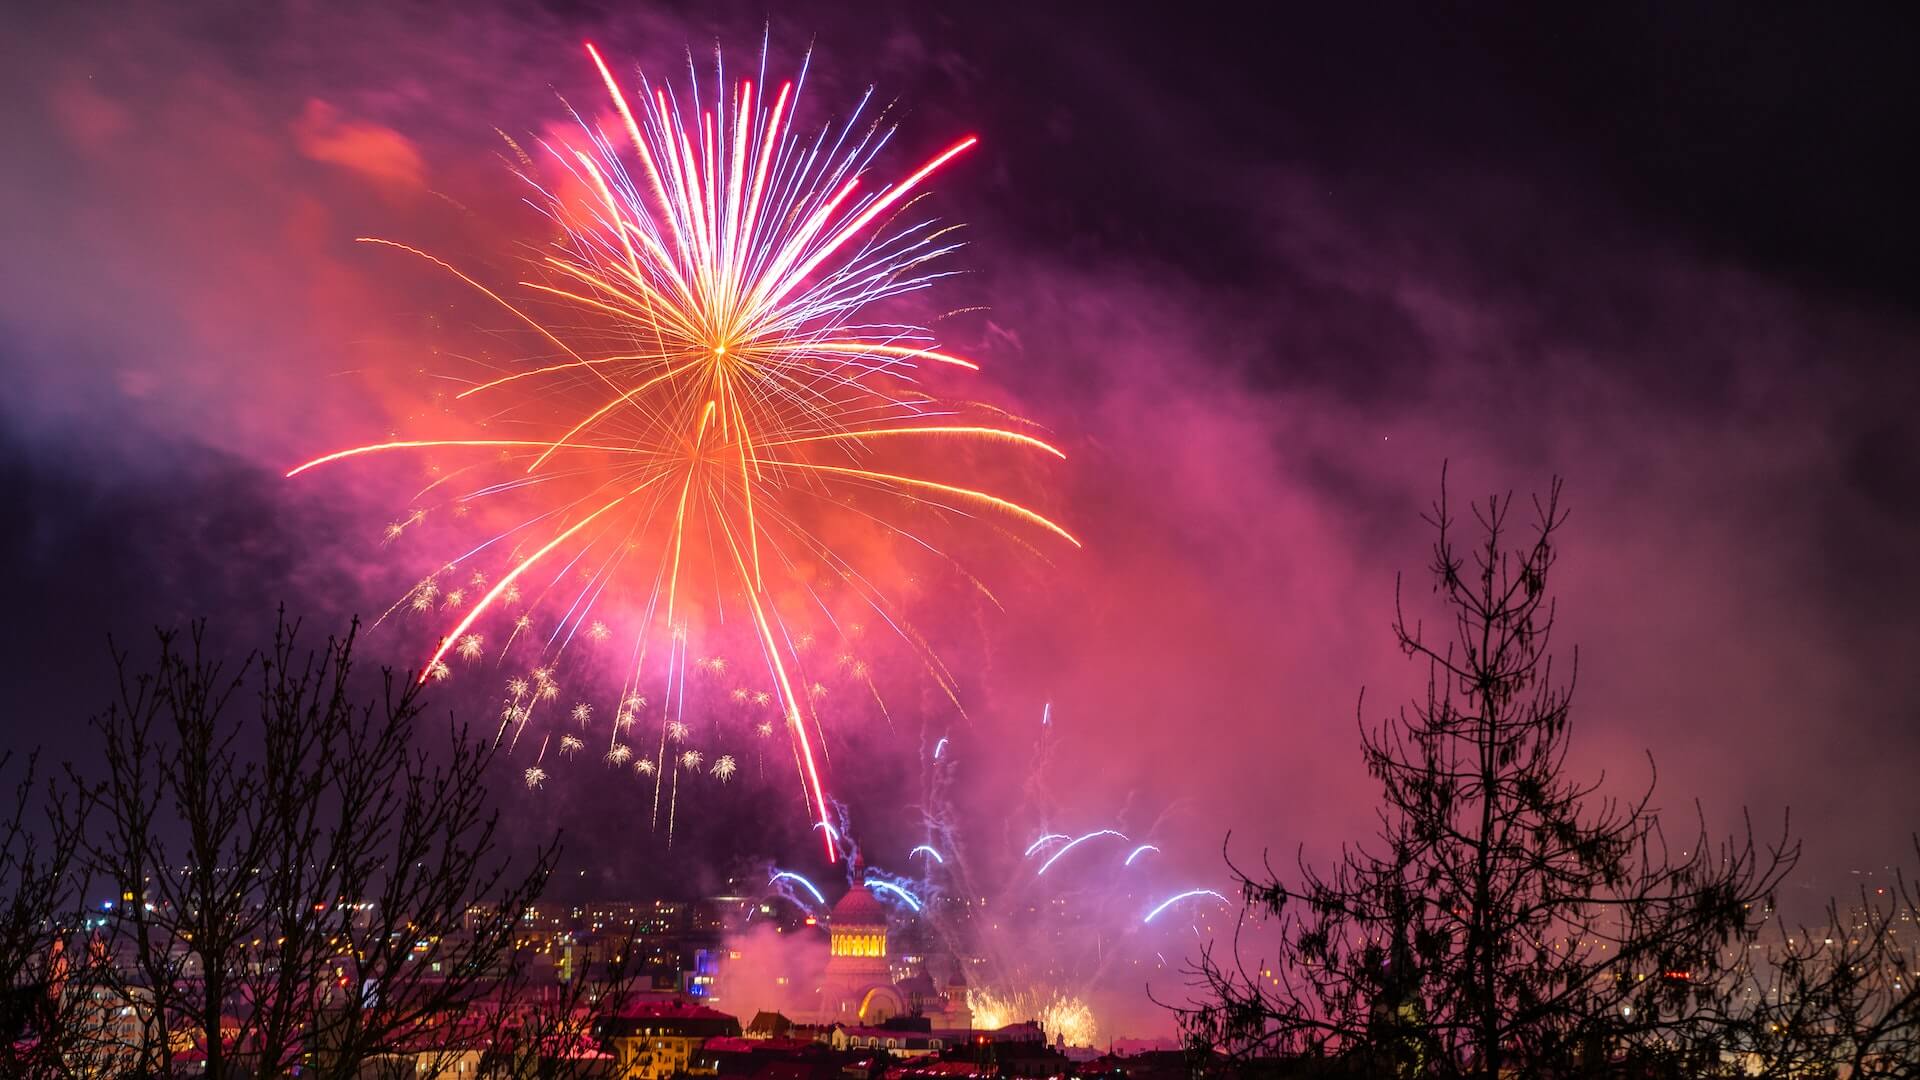 Tips For Photographing Fireworks